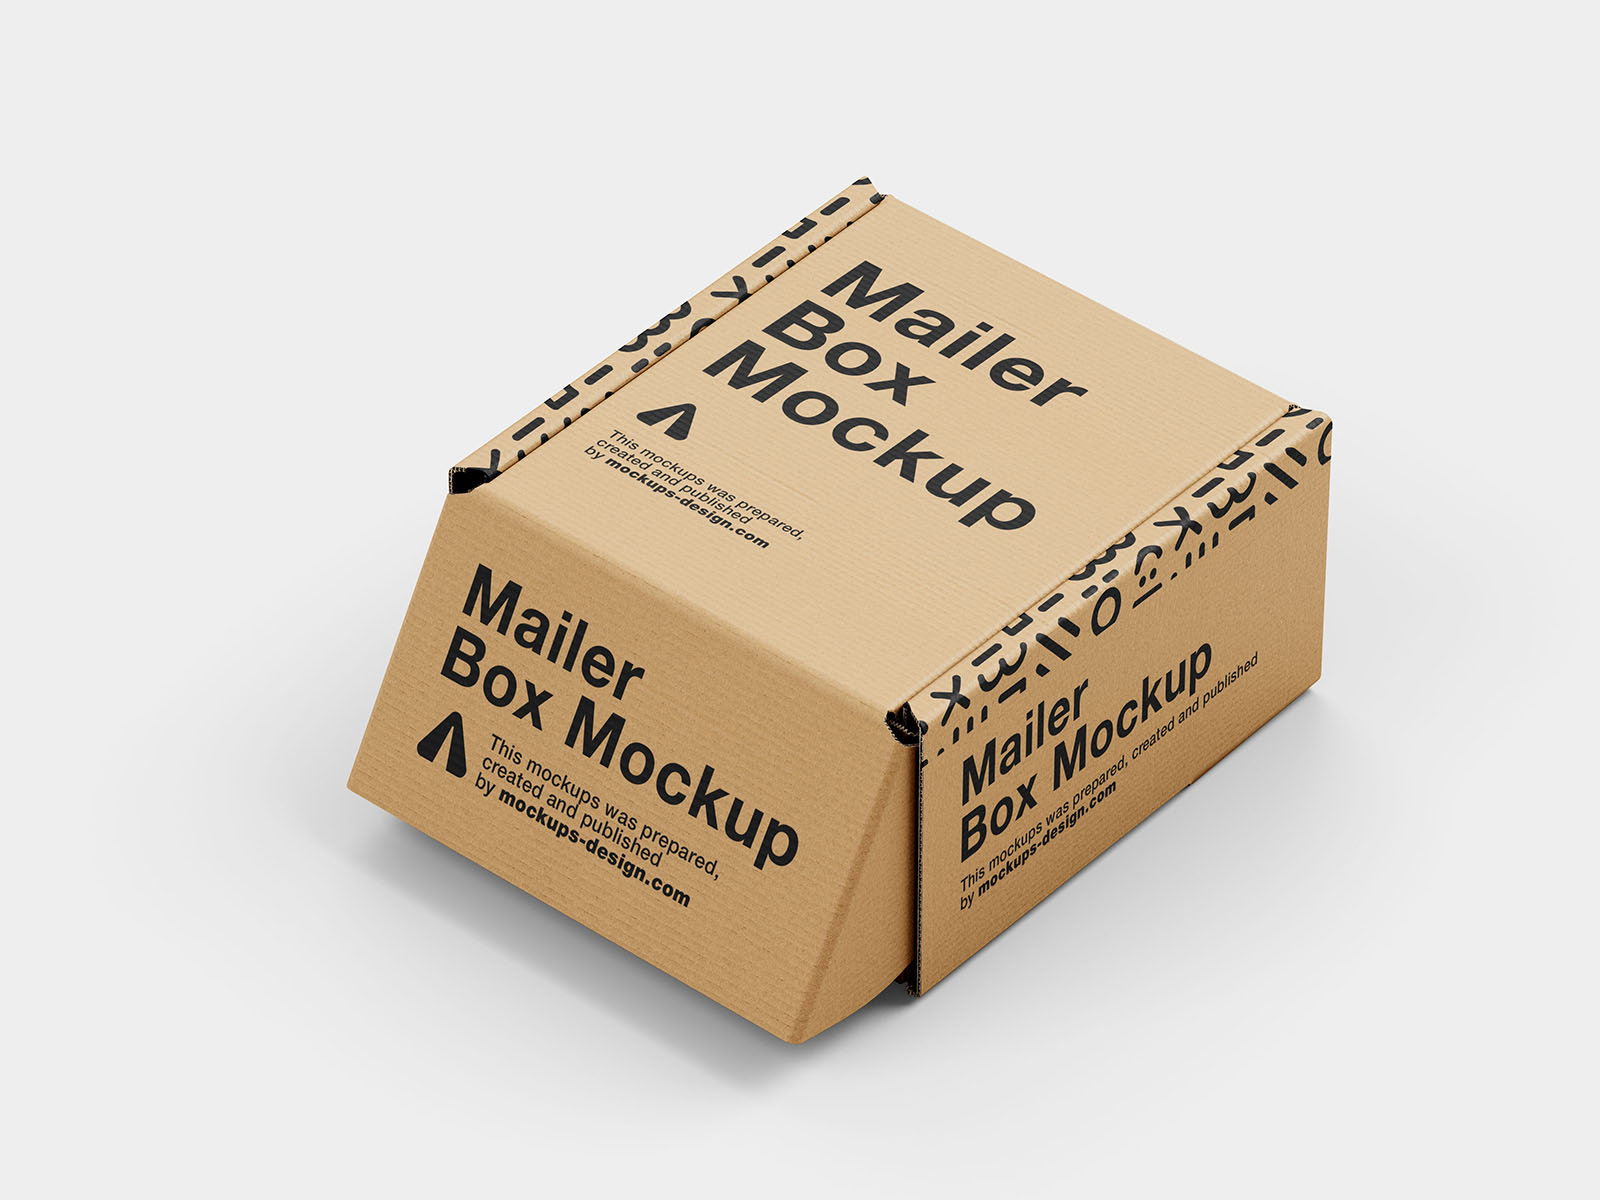 Small Mailer Box Mockup in 4 Different Visions FREE PSD